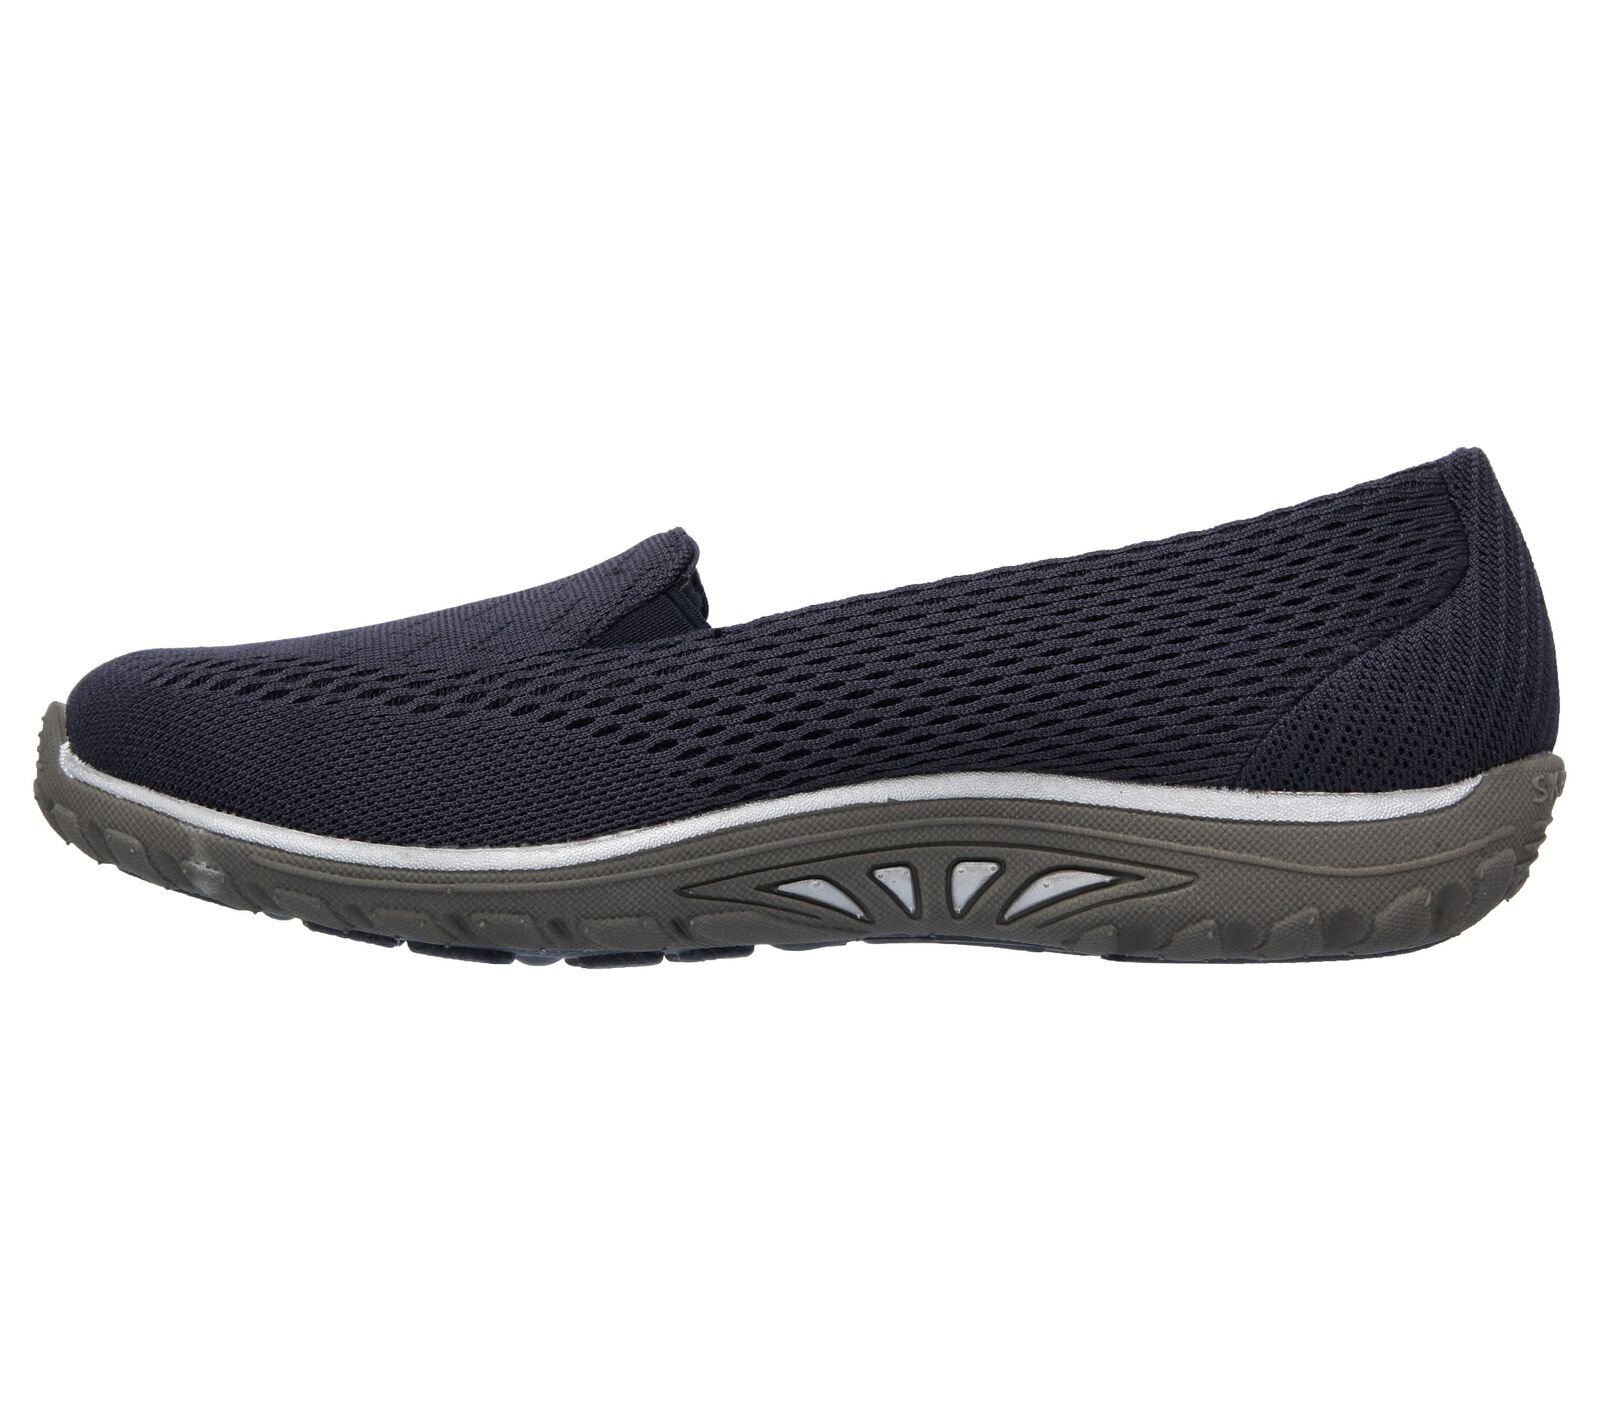 Shop the Relaxed Fit: Reggae Fest - Willows | SKECHERS CA